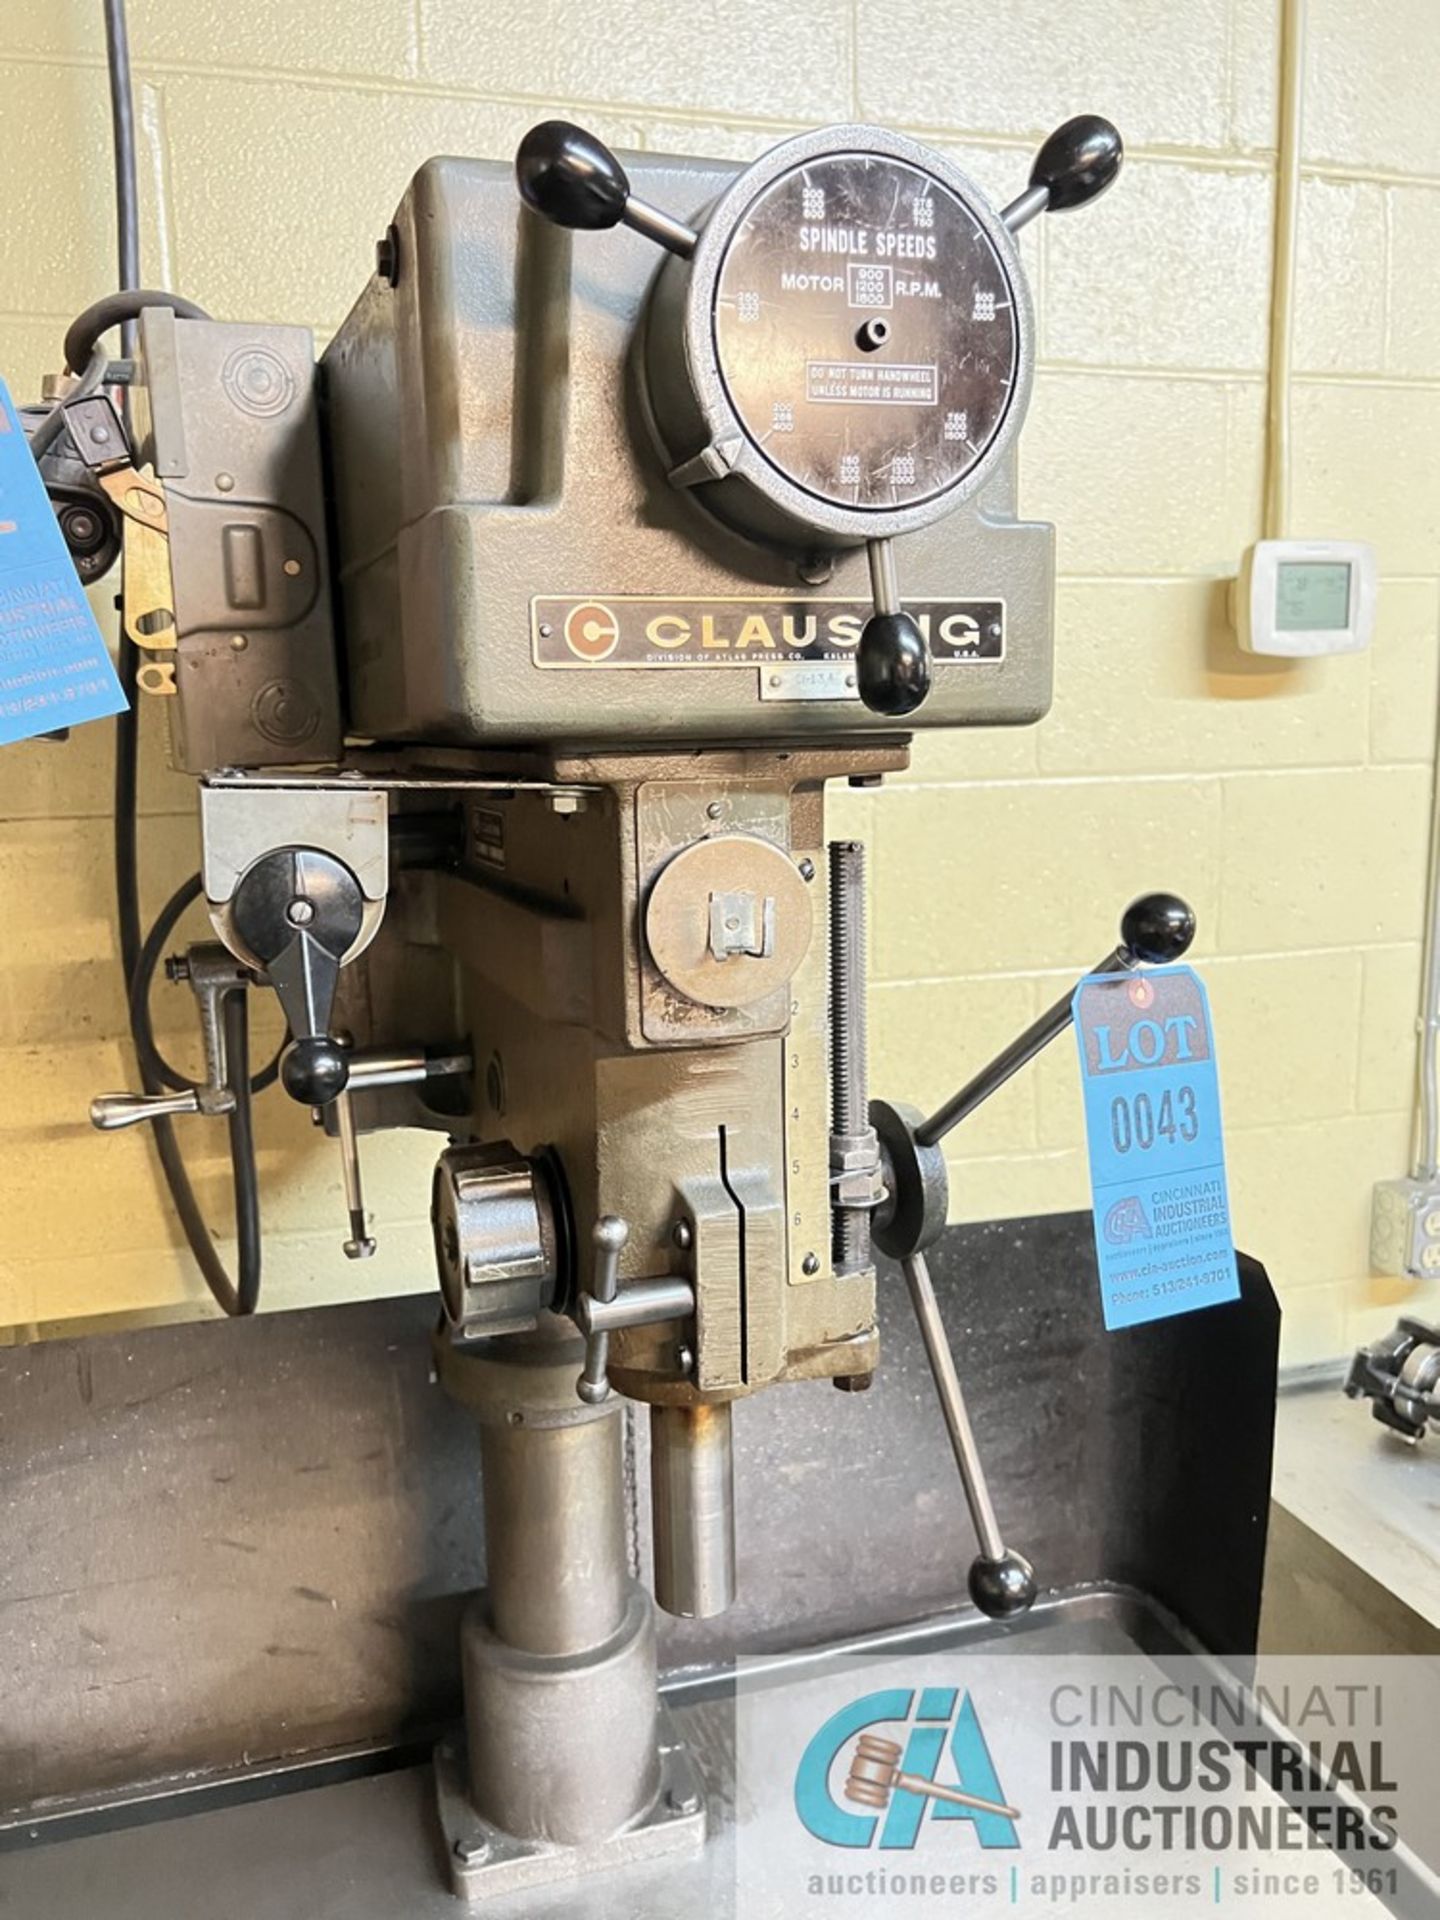 20" CLAUSING MODEL 2285 DRILL PRESS; S/N 514391, 40" X 22" TABLE, SPINDLE SPEEDS: 150-2,000 RPM ** - Image 3 of 6